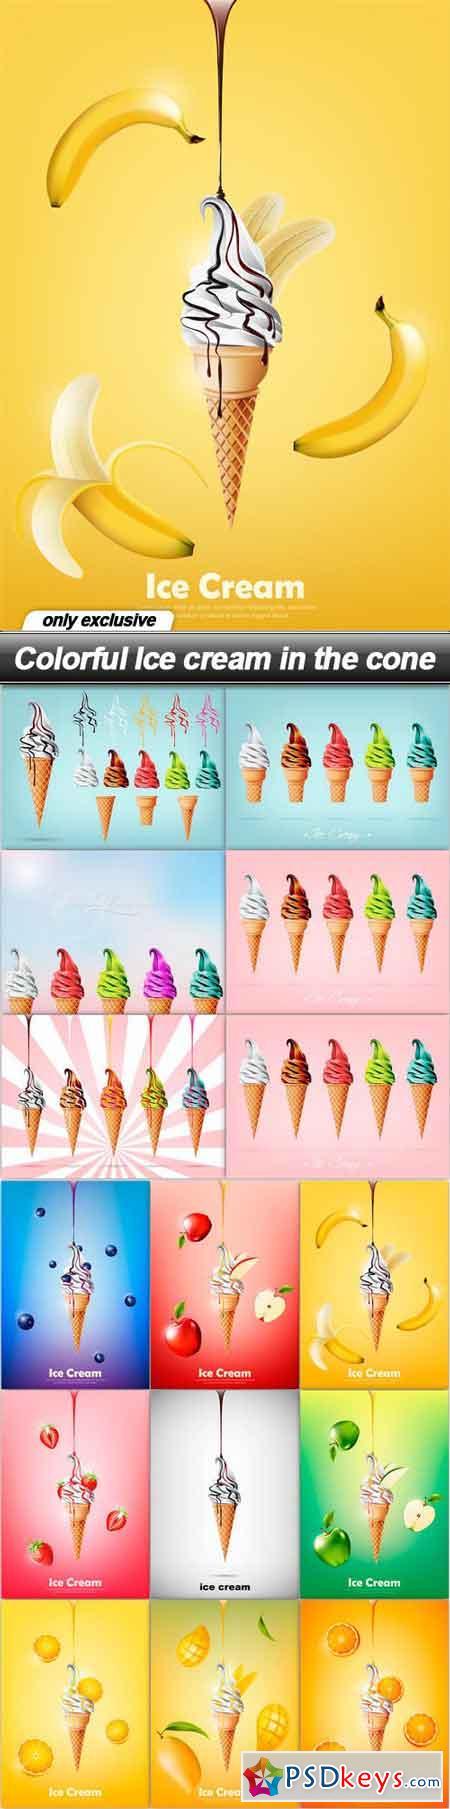 Colorful Ice cream in the cone - 15 EPS